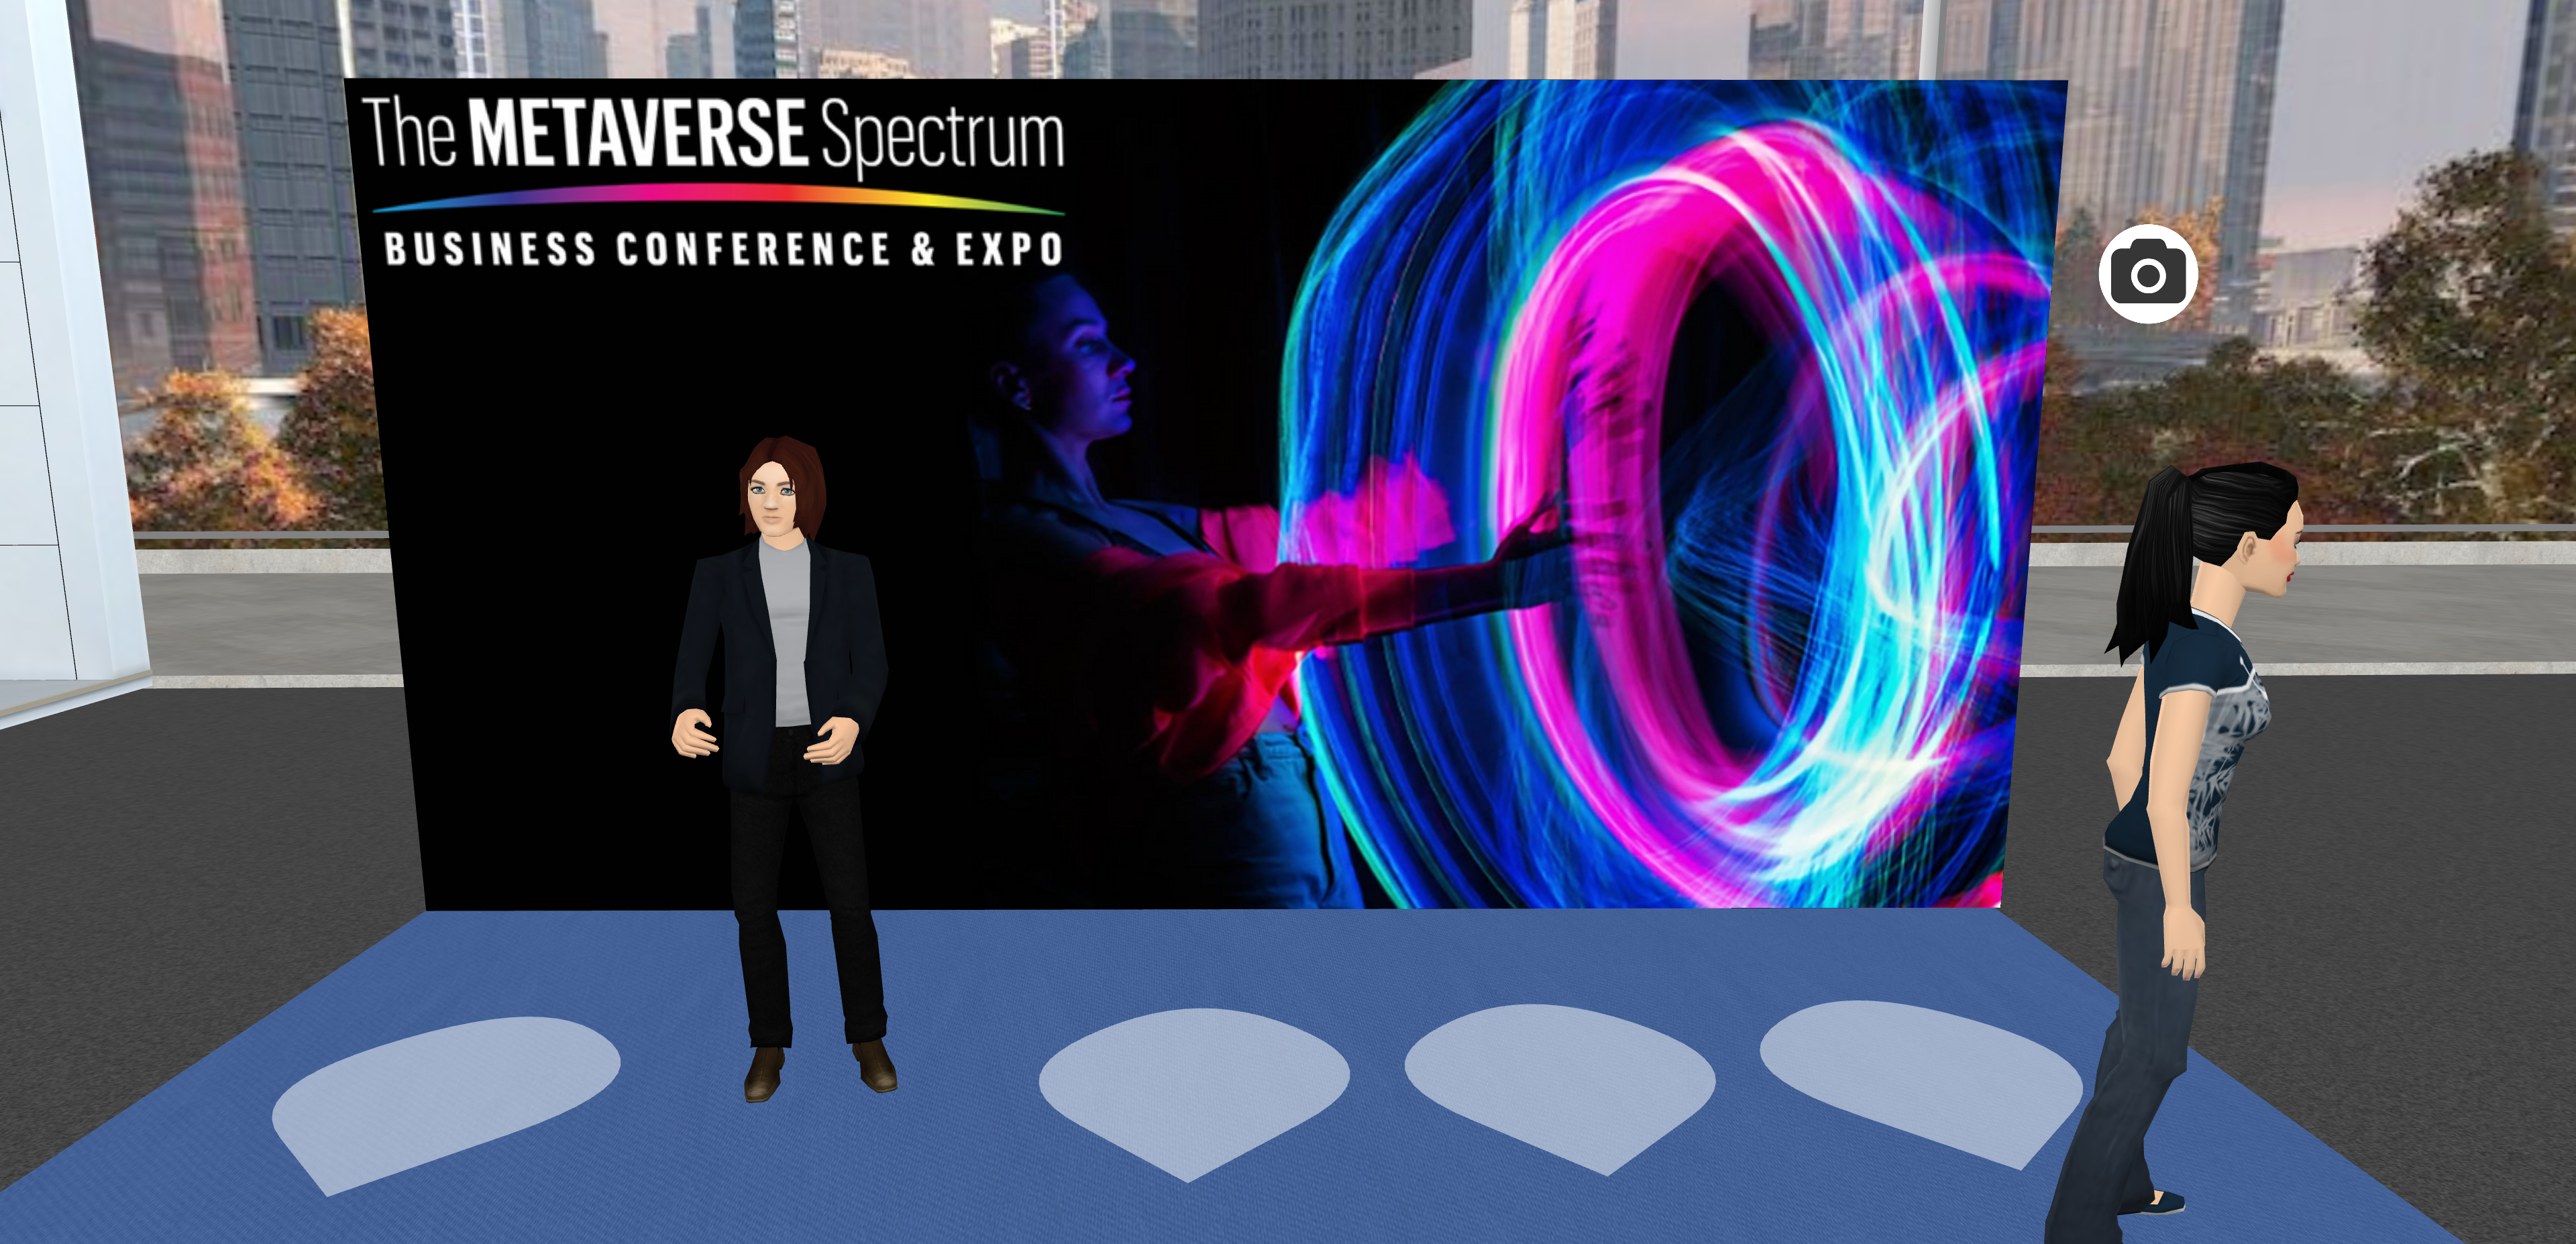 I had a blast pitching at the Metaverse Spectrum Business Conference Pitch Fest!